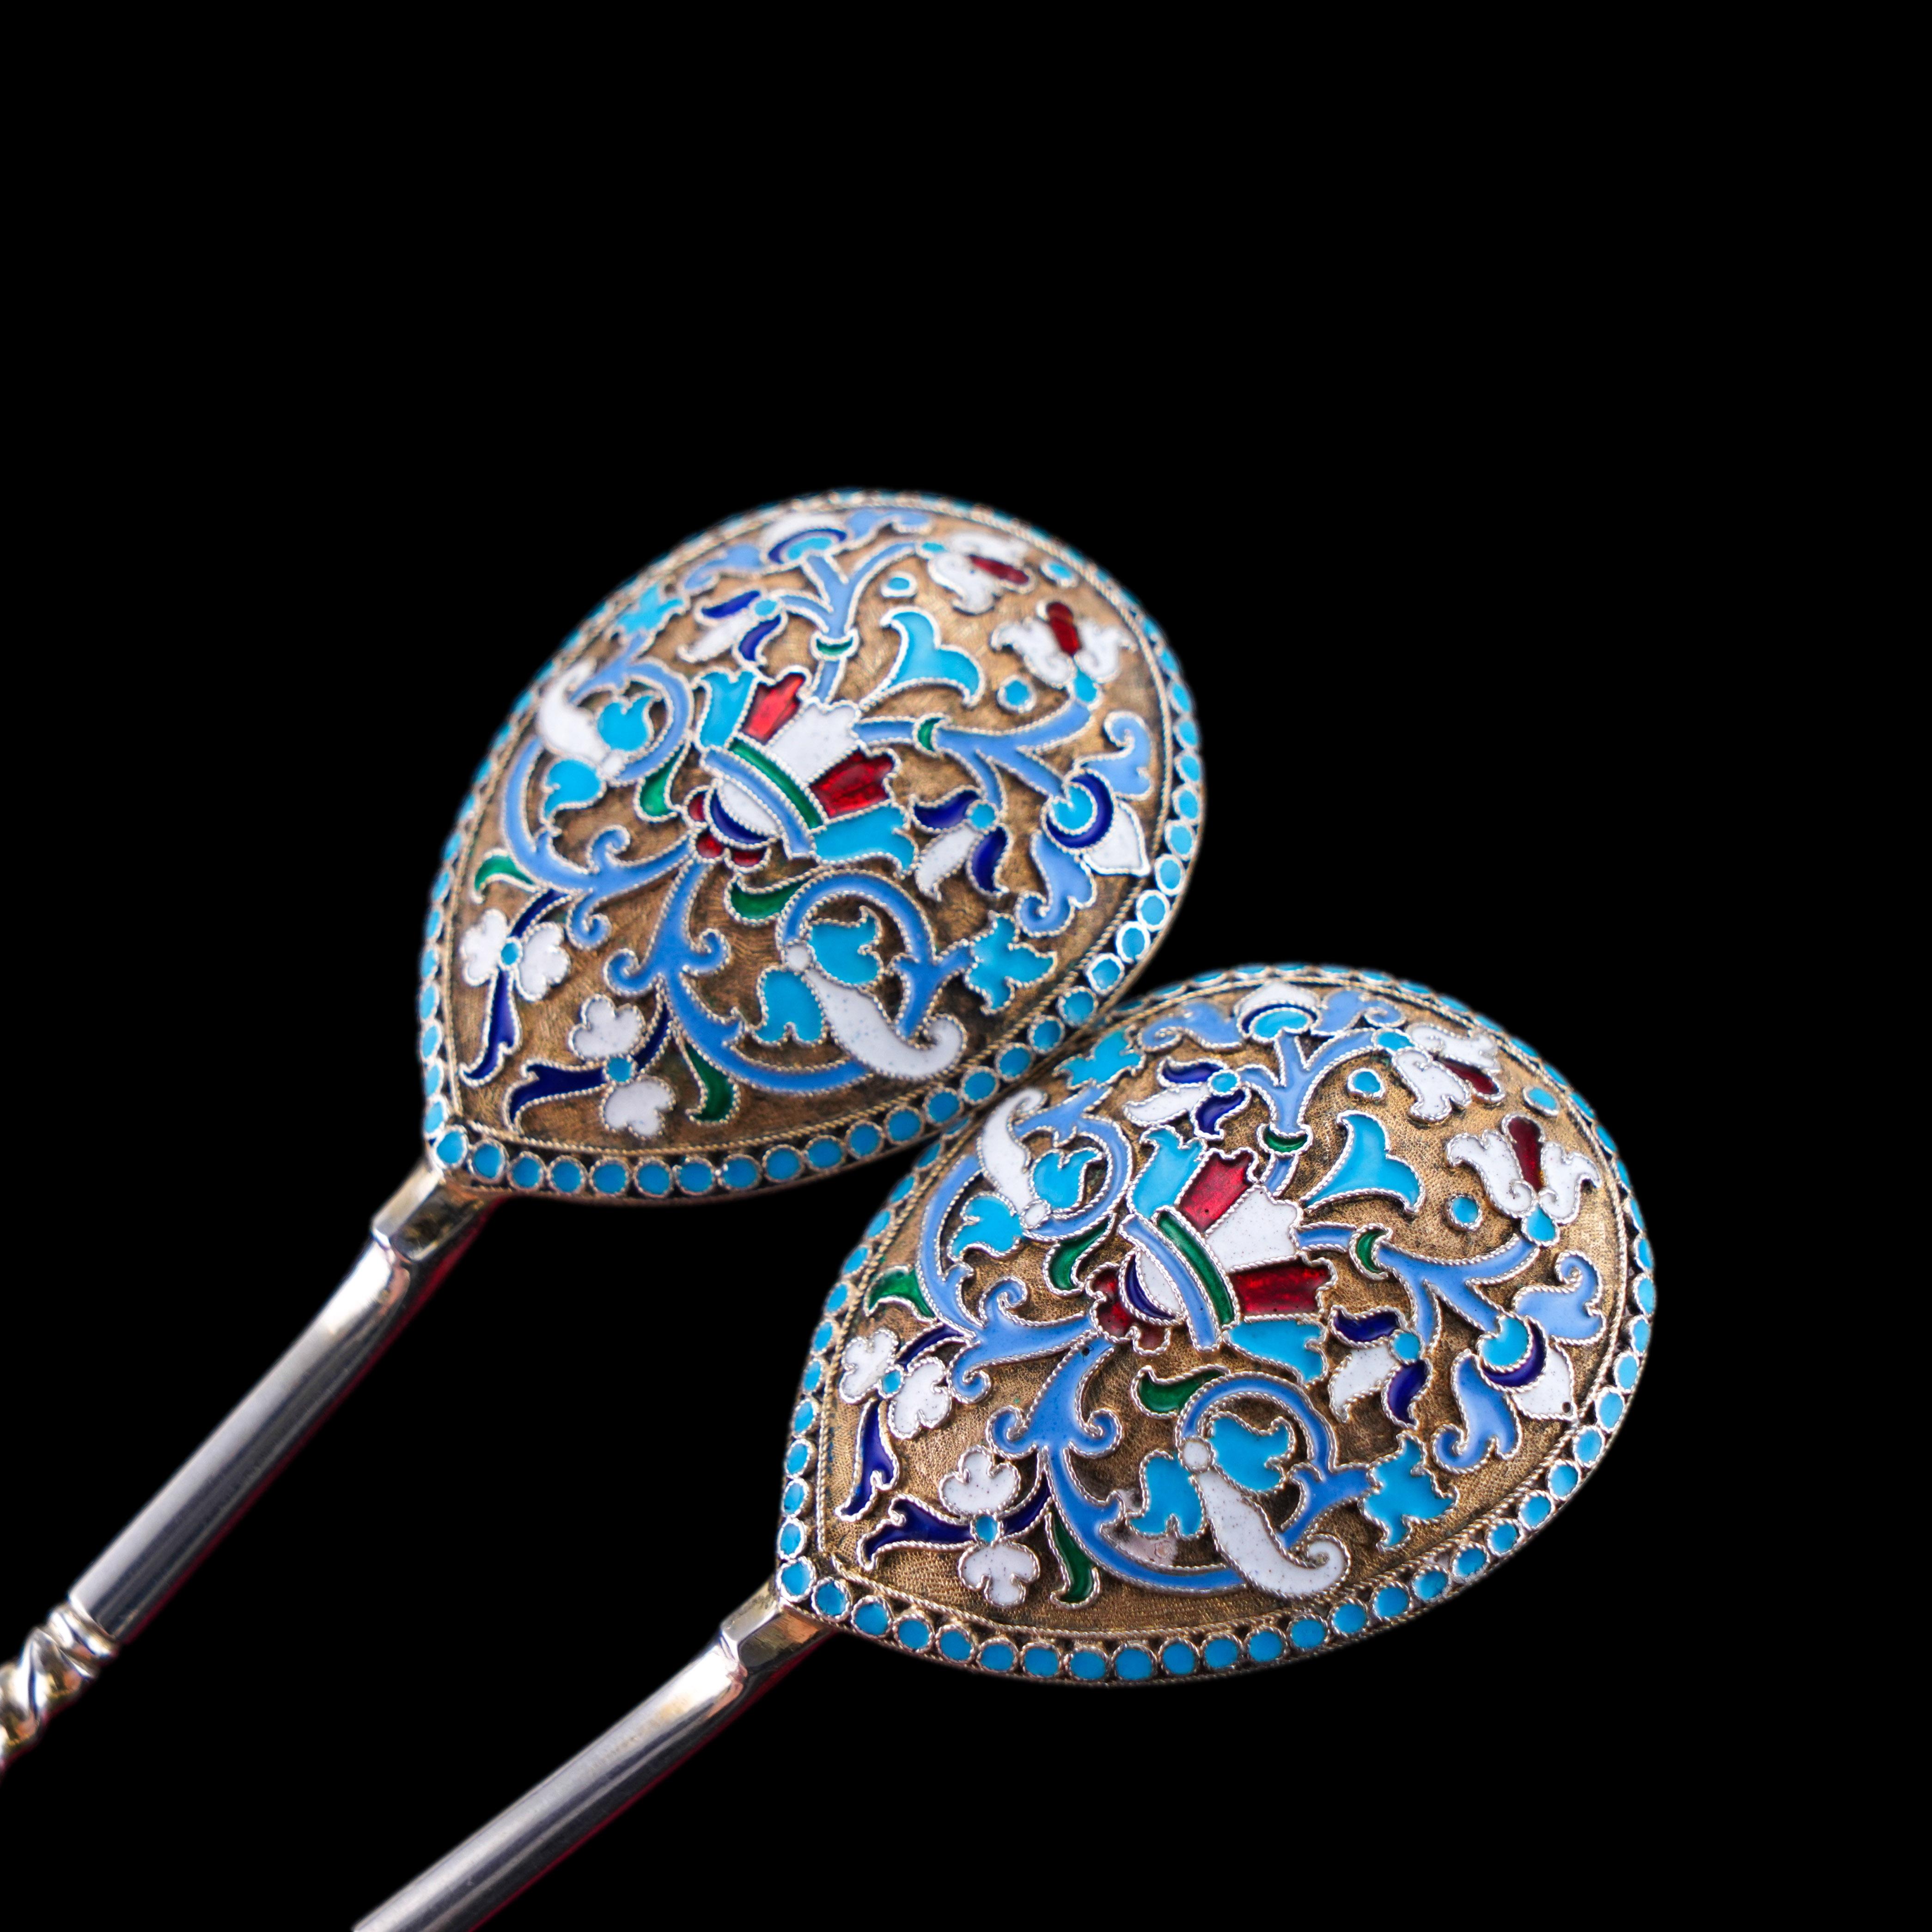 19th Century Antique Imperial Russian Solid Silver Spoons with Cloisonne Enamel c.1882 For Sale